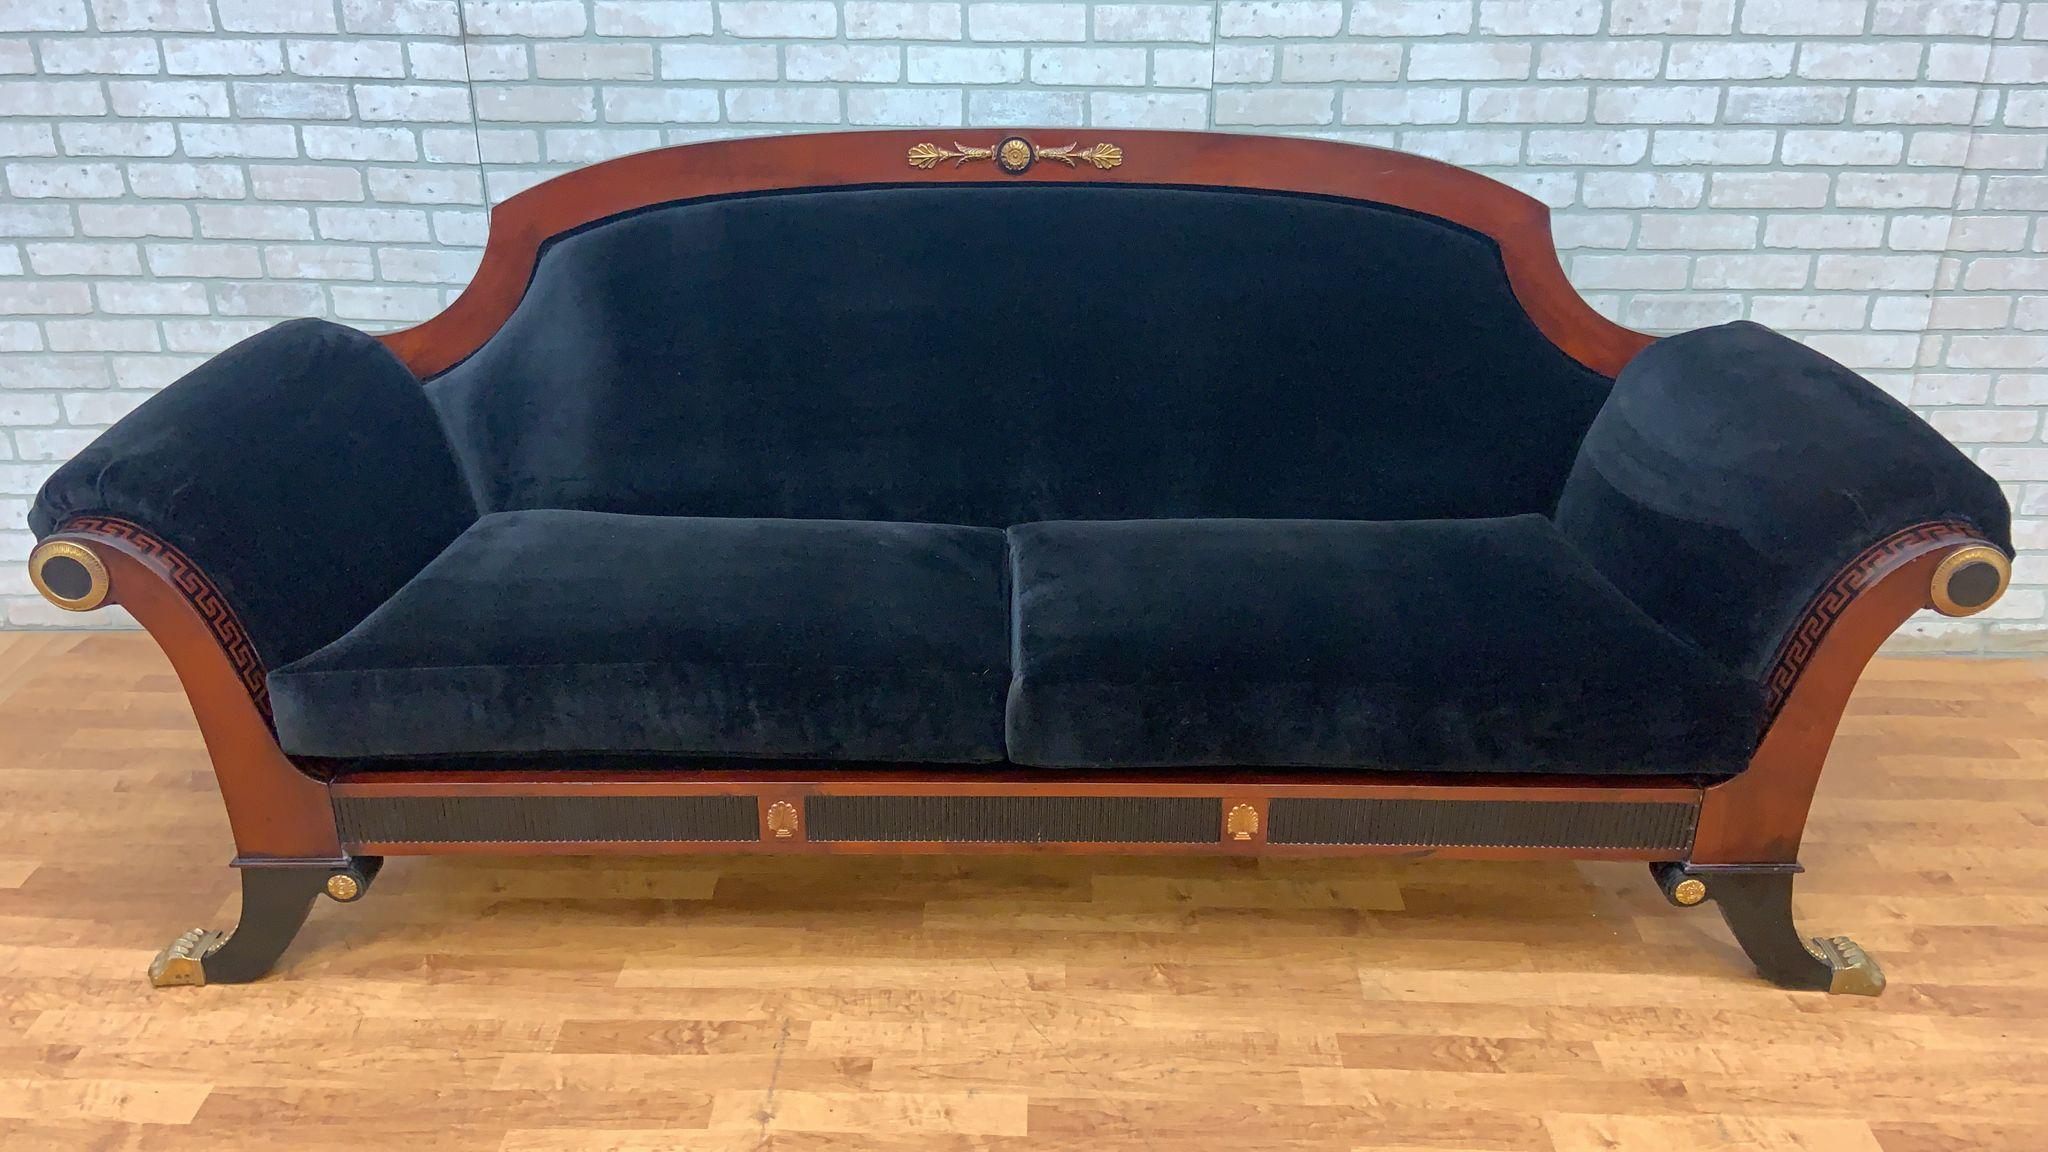 Antique Grecian Mahogany Scroll Arm Sofa with Brass Mounted Decorative Trim and Paw-Foot Guards Newly Upholstered in Plush Black Italian Velvet

Classic carved mahogany Grecian sofa, newly upholstered in a high end plush black Italian velvet with